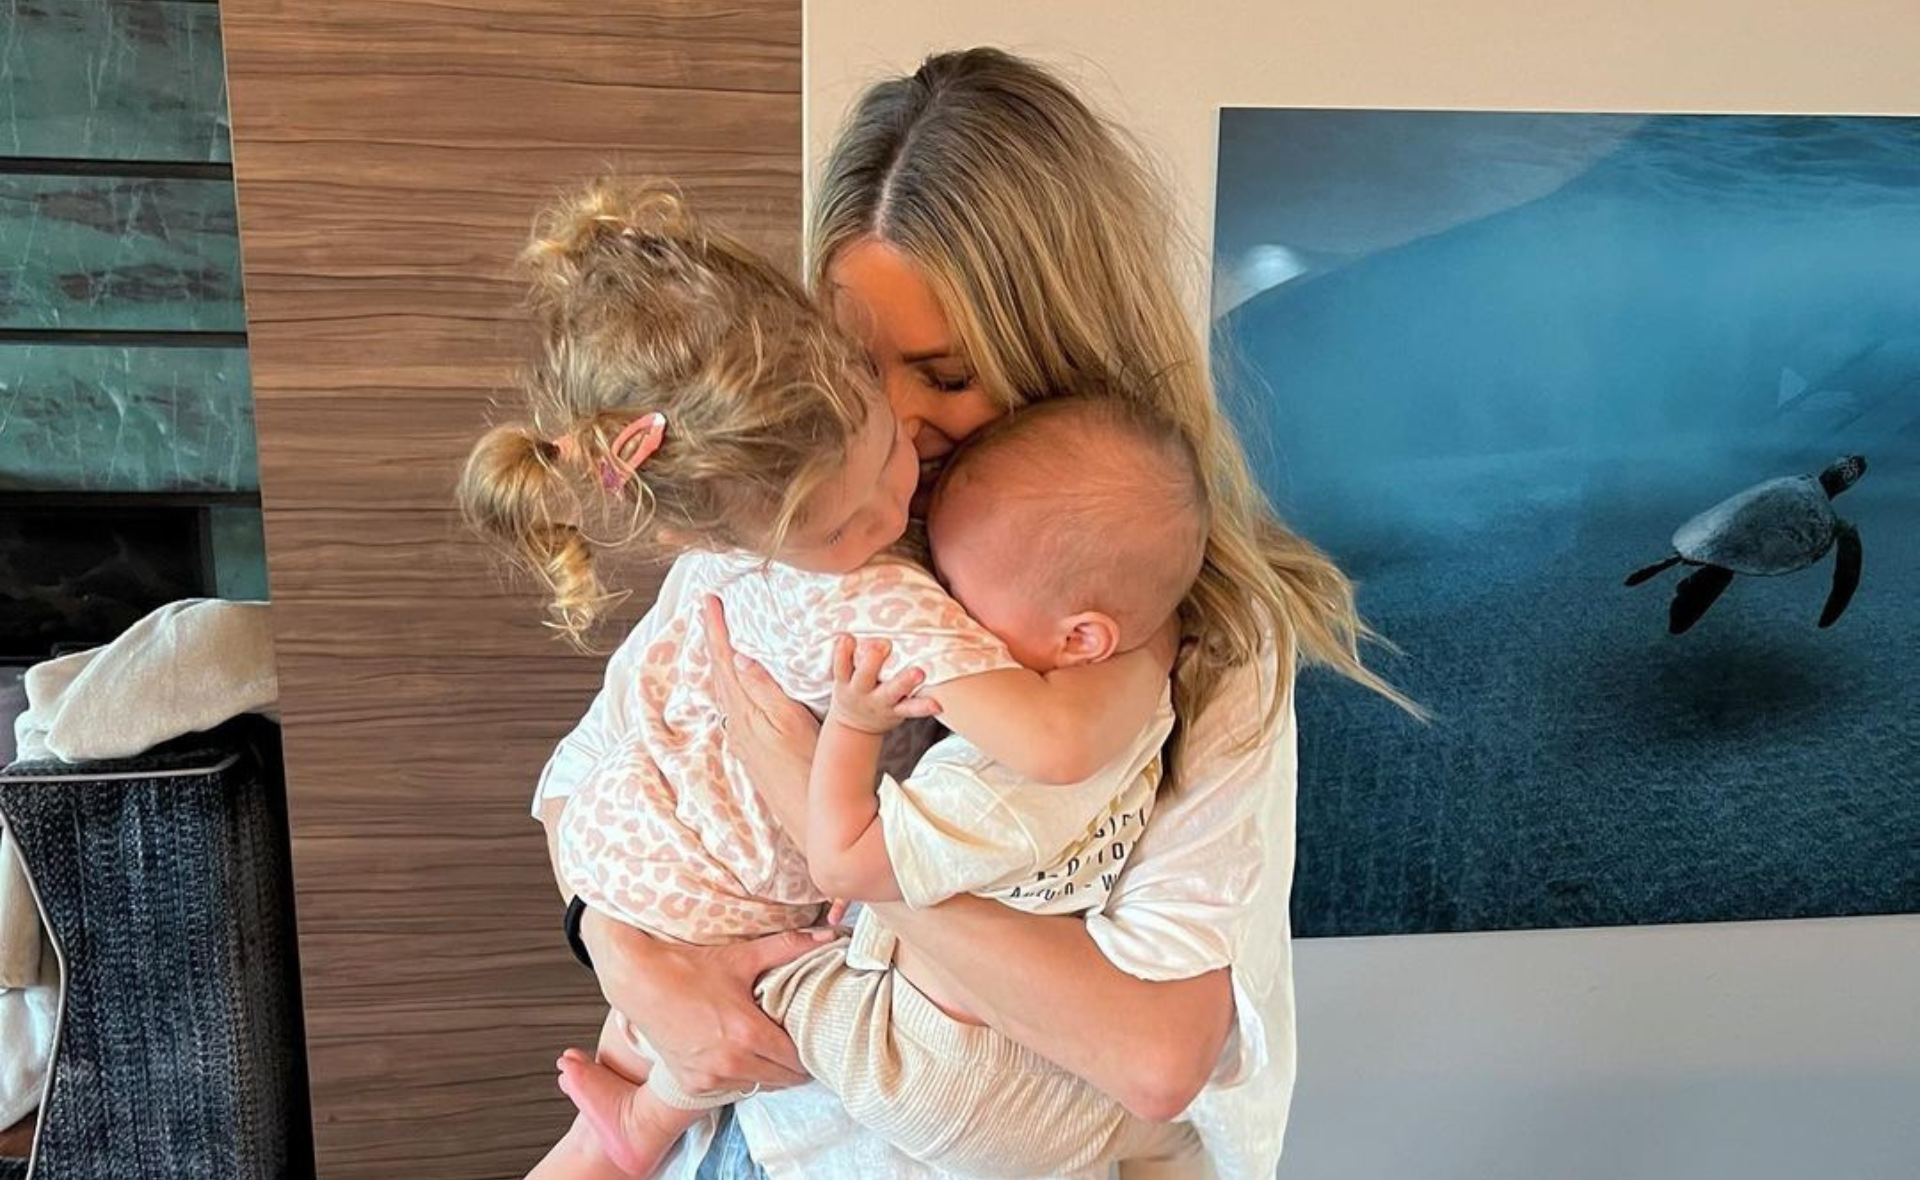 “You brighten our world”: Jennifer Hawkins shares tear-jerking tribute to daughter Frankie for special milestone